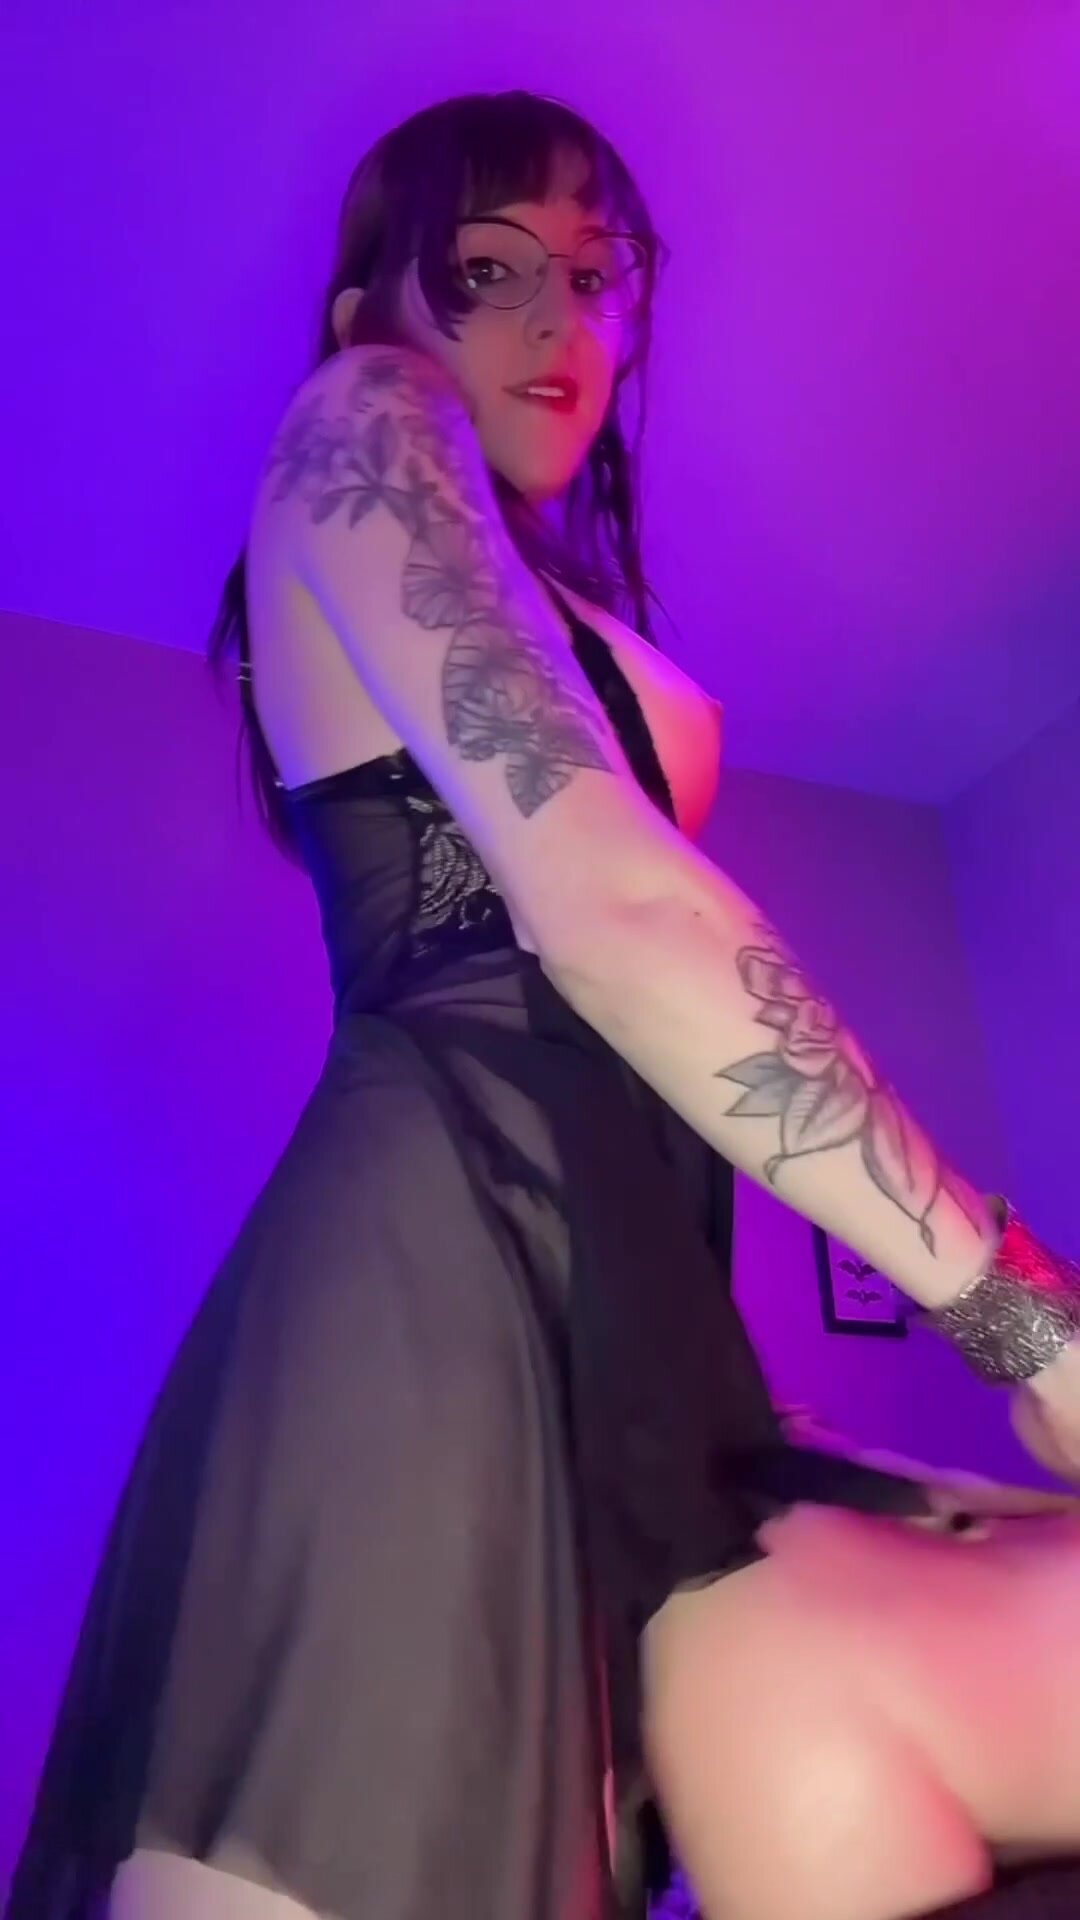 goth girls inside you like this, are you squeezing the cum out of her or make her last longer?